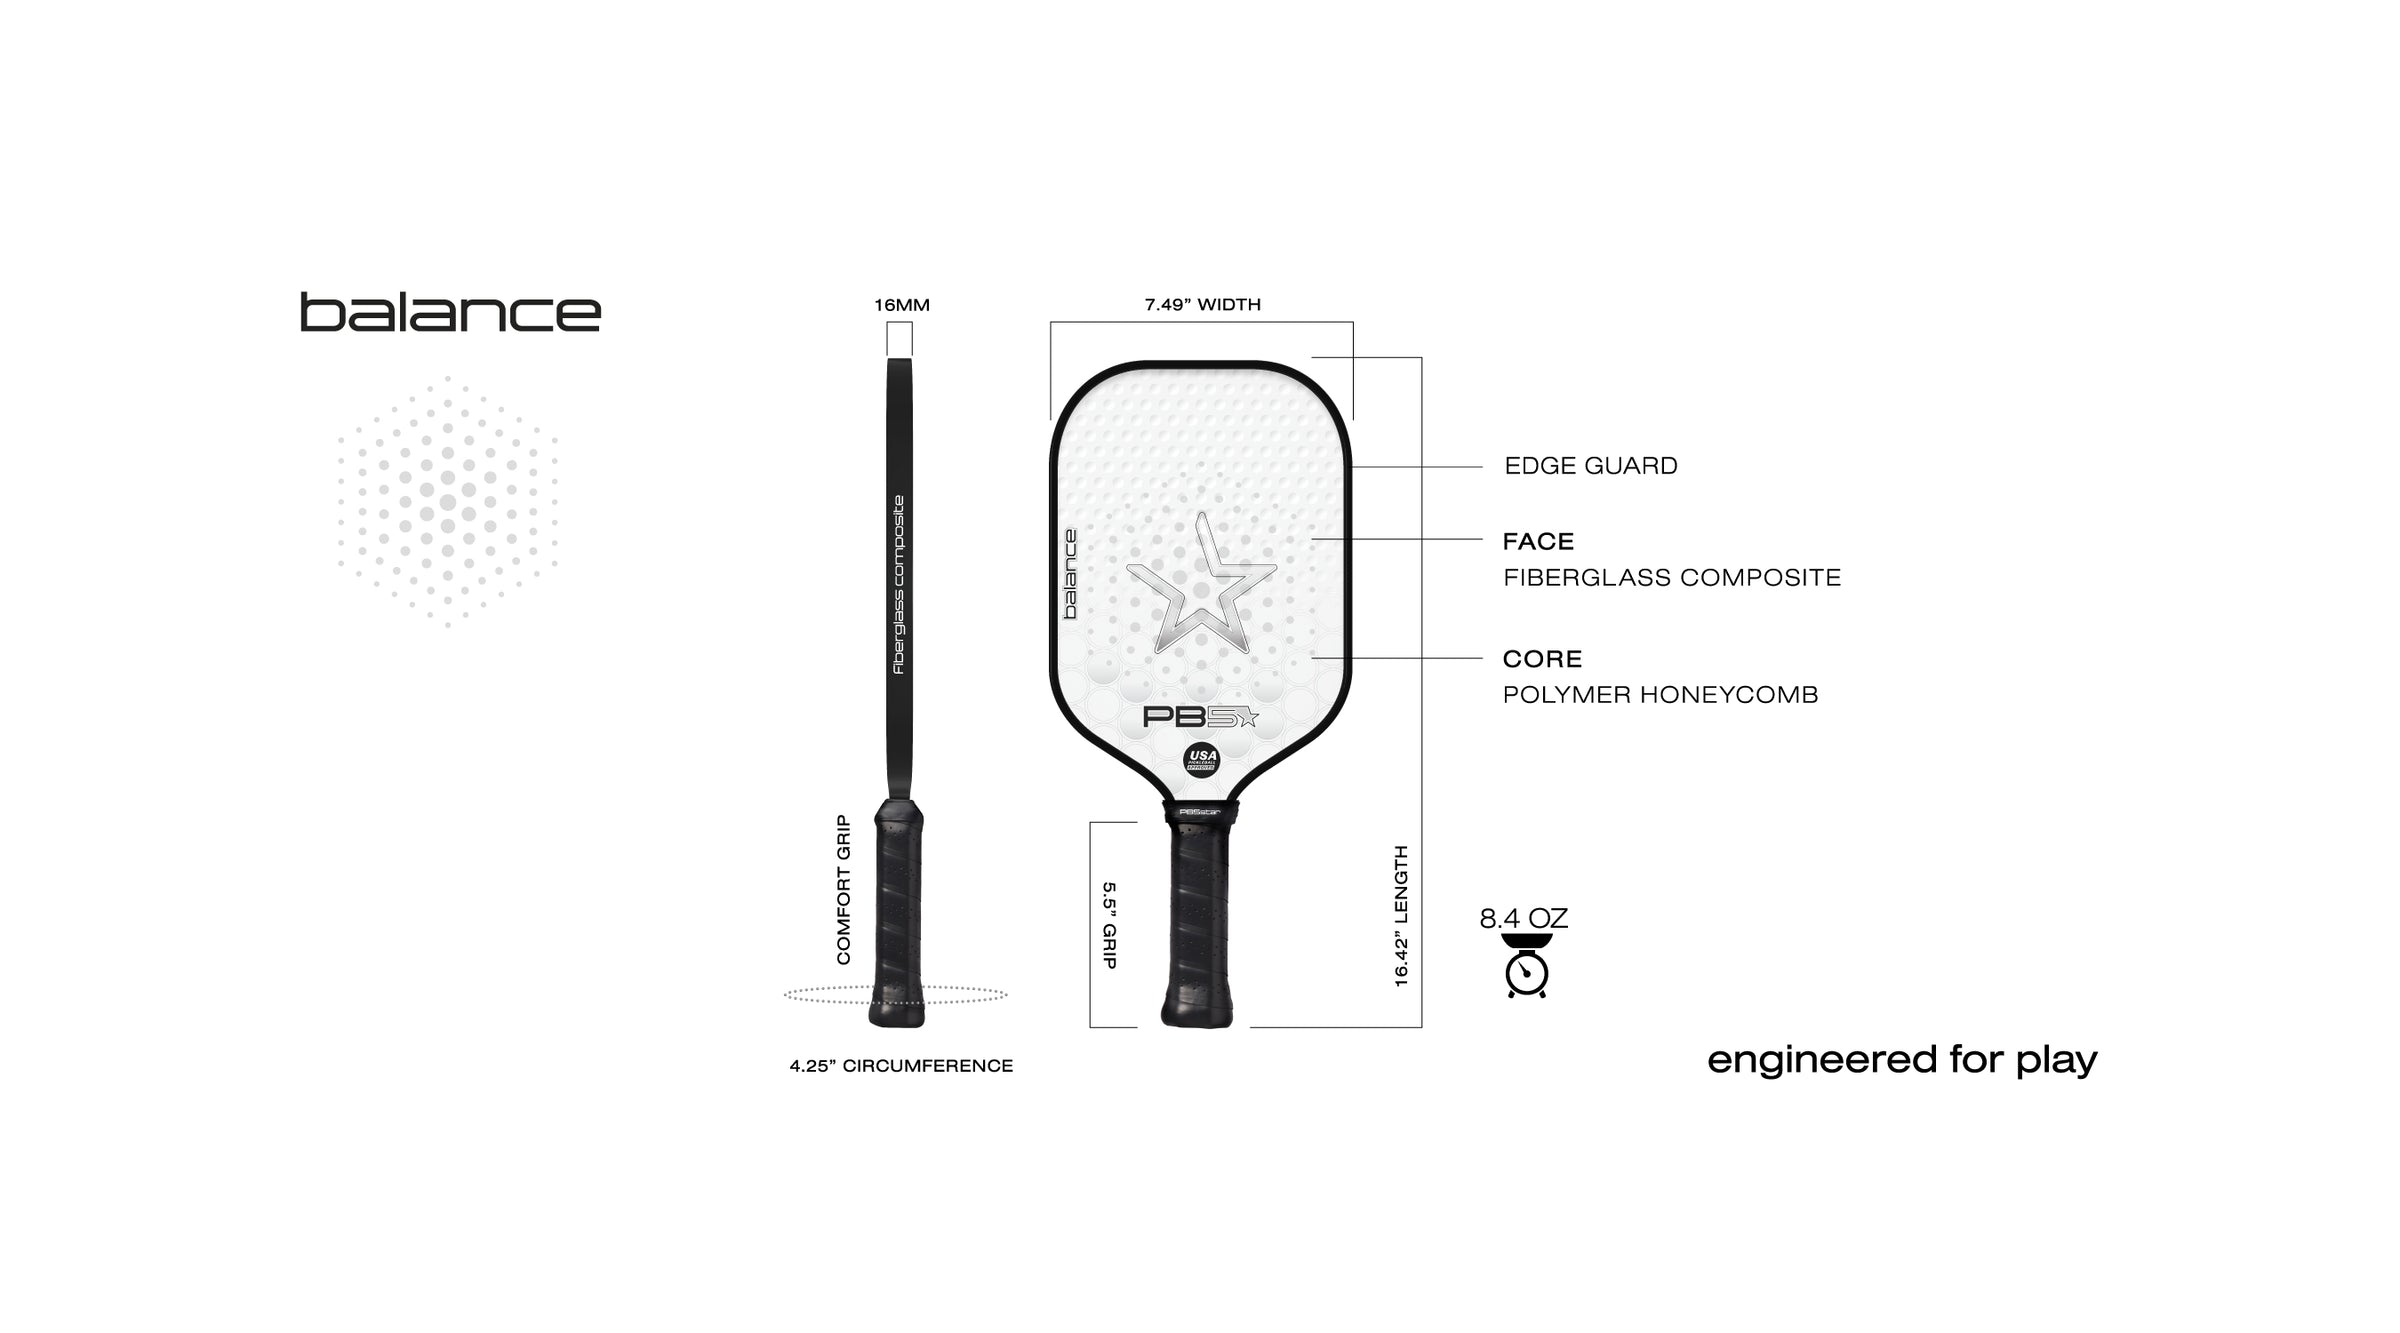 Balance Paddle: comfort grip, edge guard, fiberglass composite face, polymer honeycomb core, weight 8.4 oz. Engineered for play.